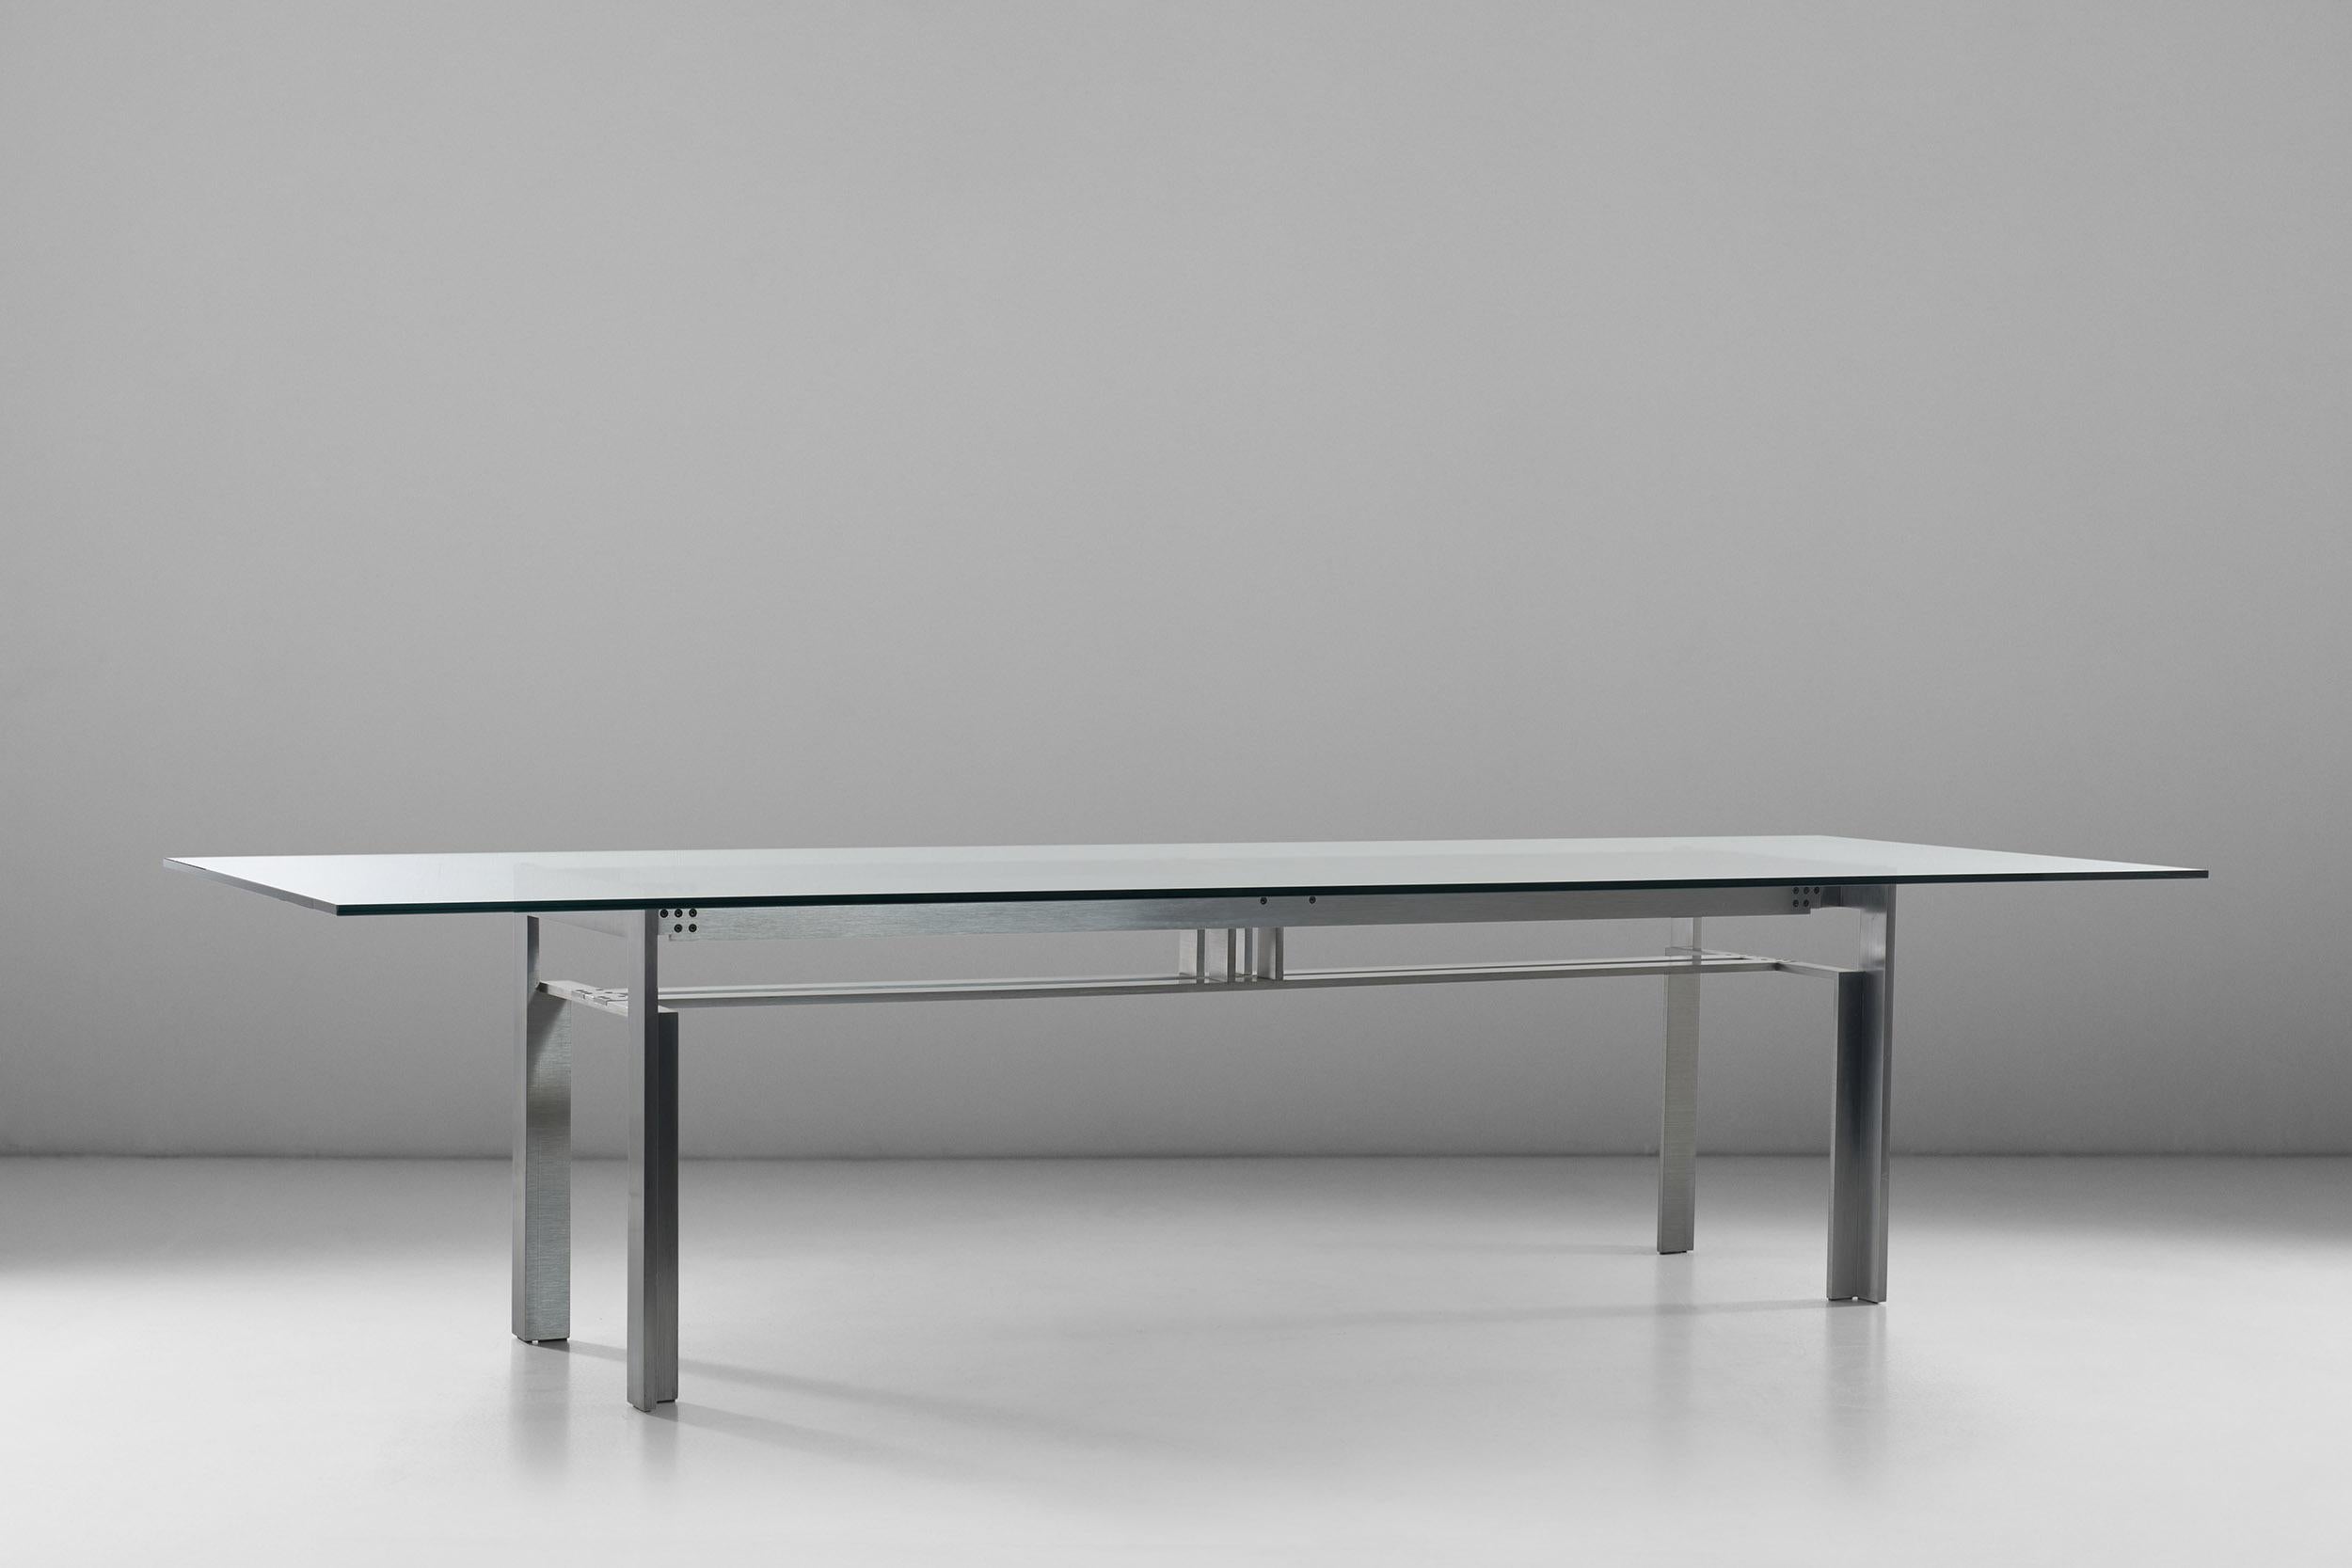 This sculptural table has become an emblem of Italian design, a trademark of the '60s rational movement. The architectural base in thick steel profiles forms the core of this iconic table with glass top, where the refined elegance of the base takes